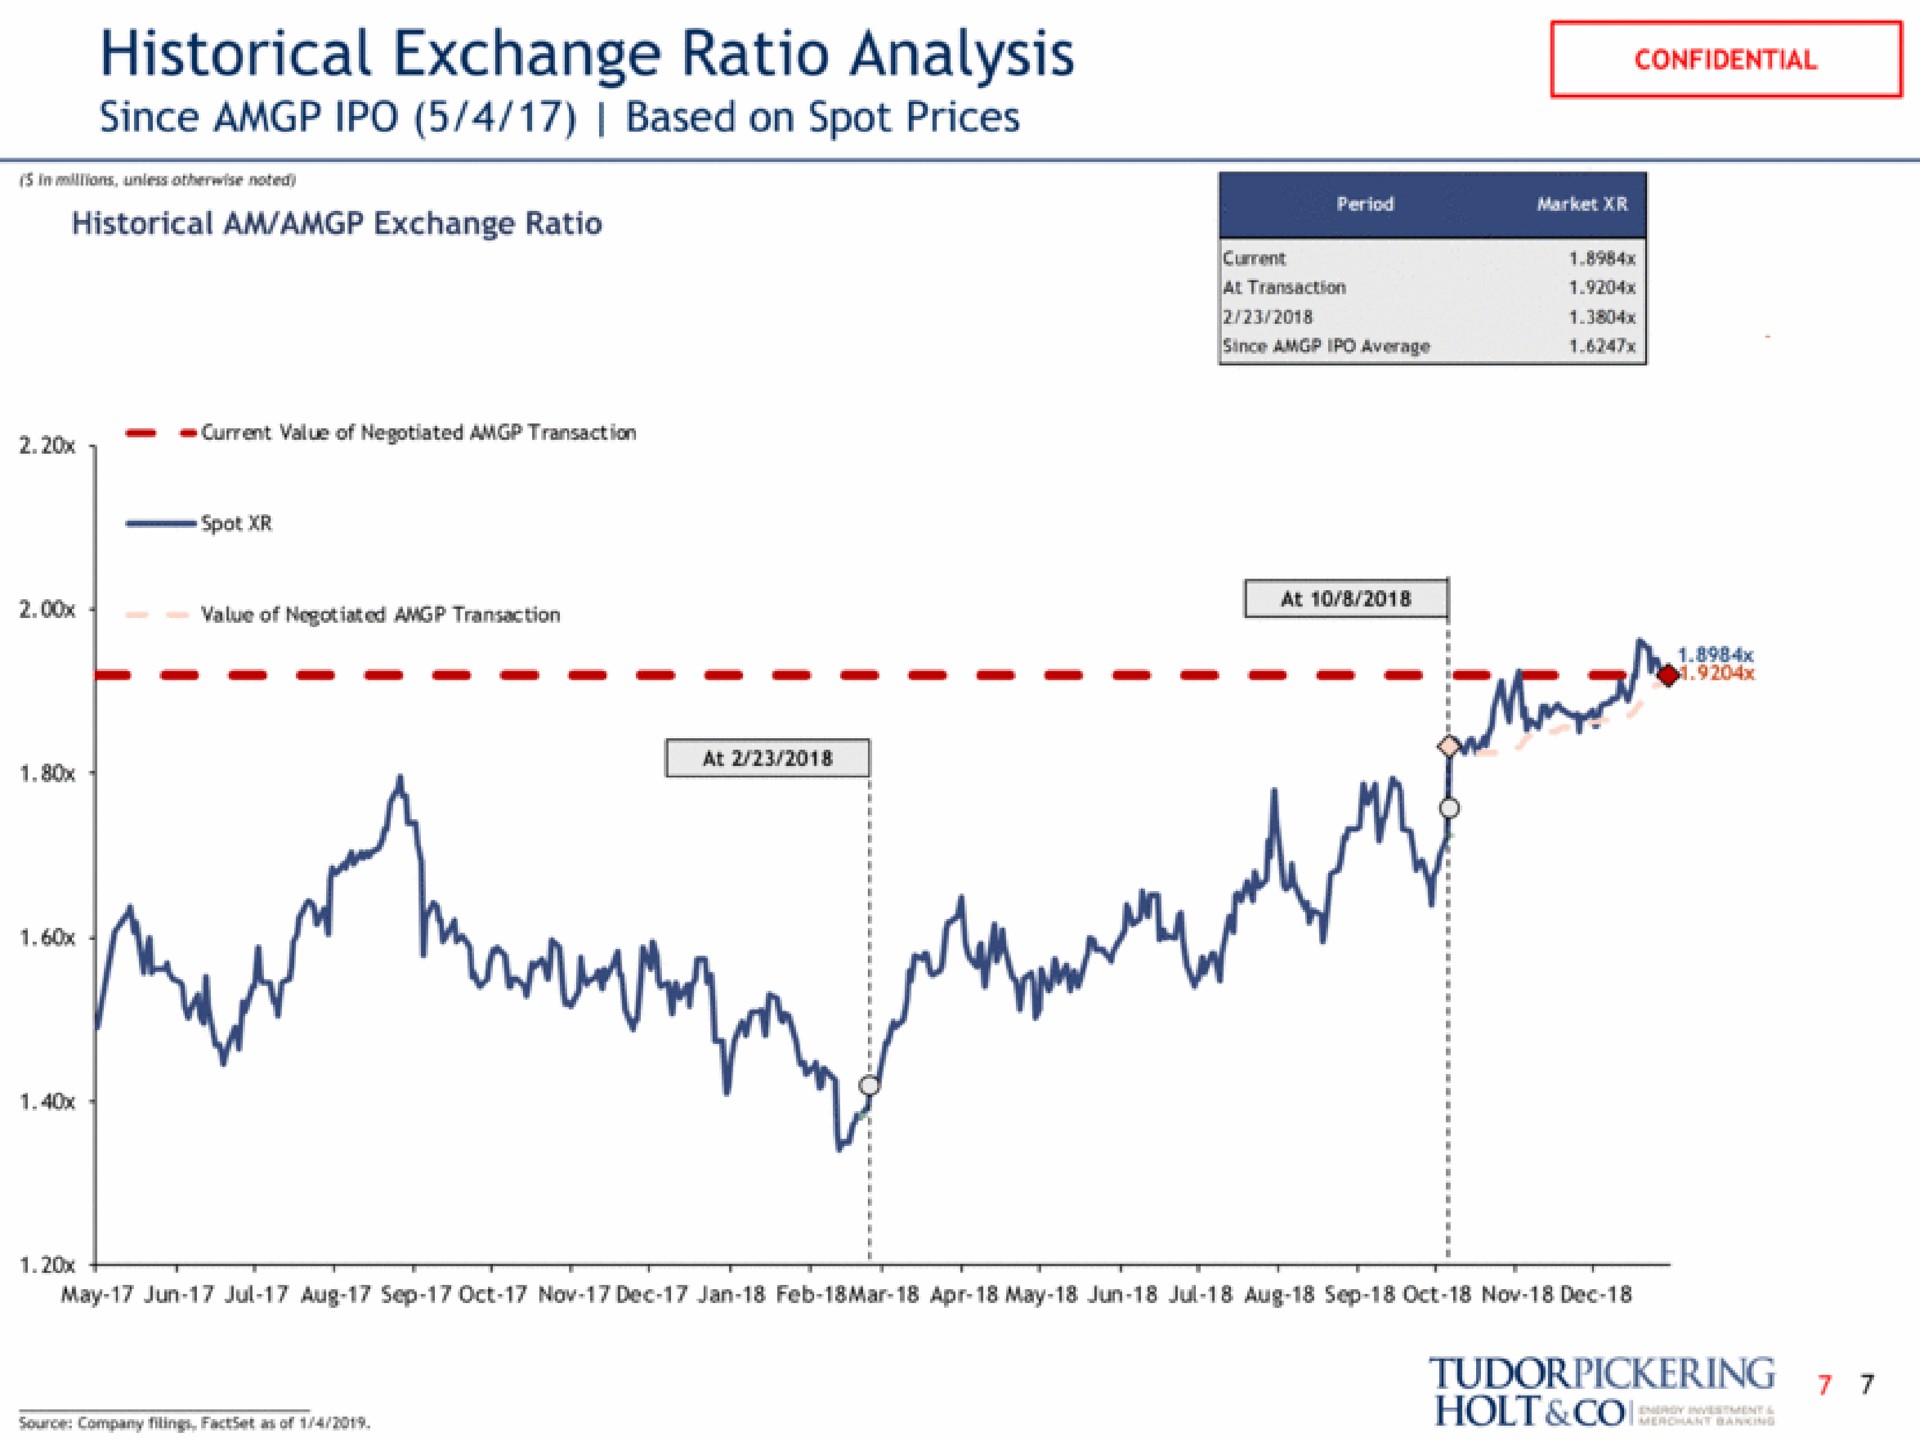 historical exchange ratio analysis since based on spot prices | Tudor, Pickering, Holt & Co